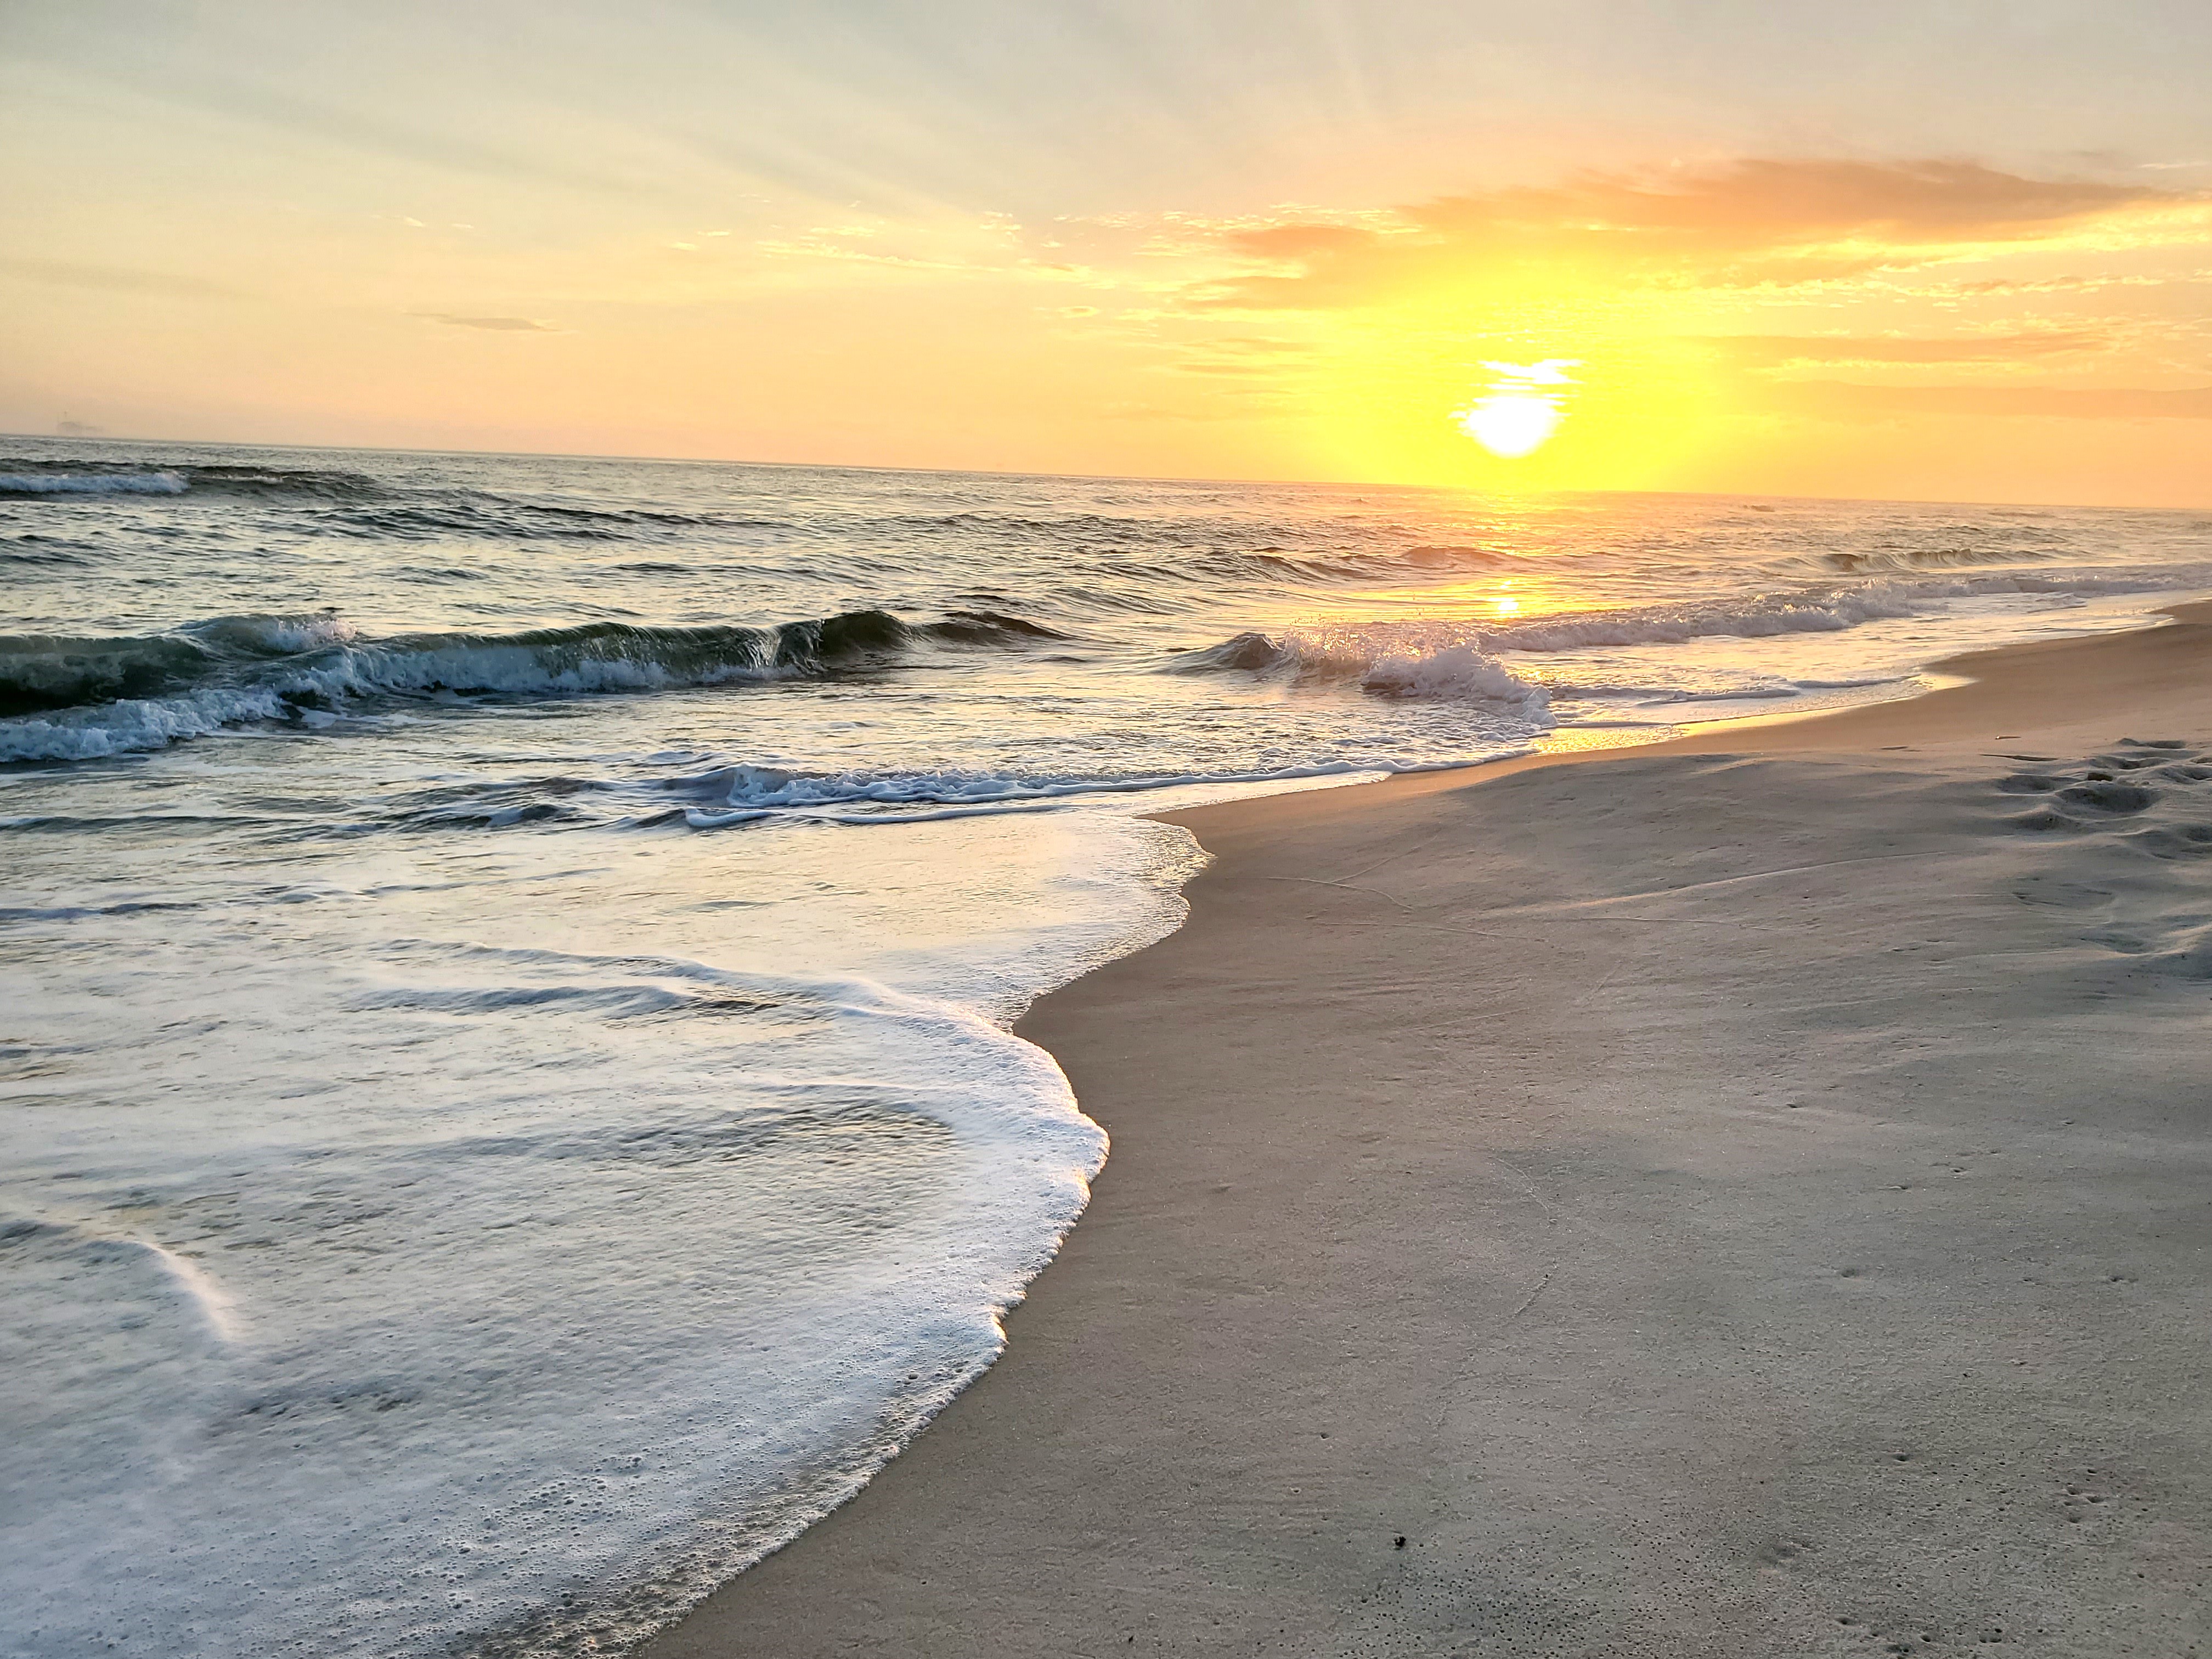 Why someone might choose to visit Fort Morgan, Alabama Beach over nearby destinations like Orange Beach?